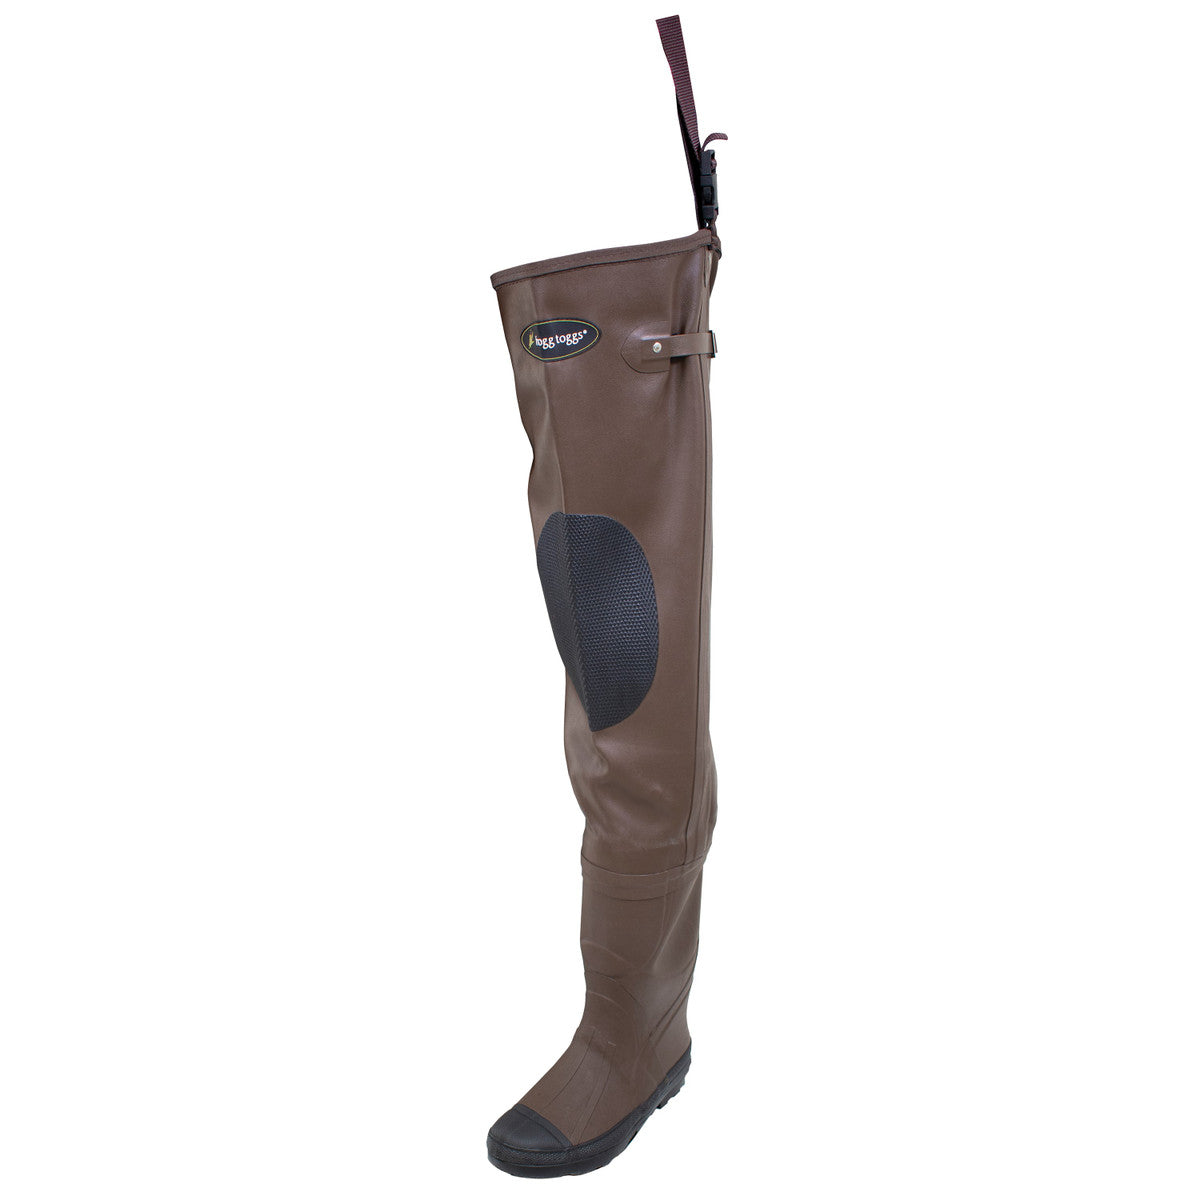 Frogg Toggs Classic II Waterproof Cleated Hip Wader